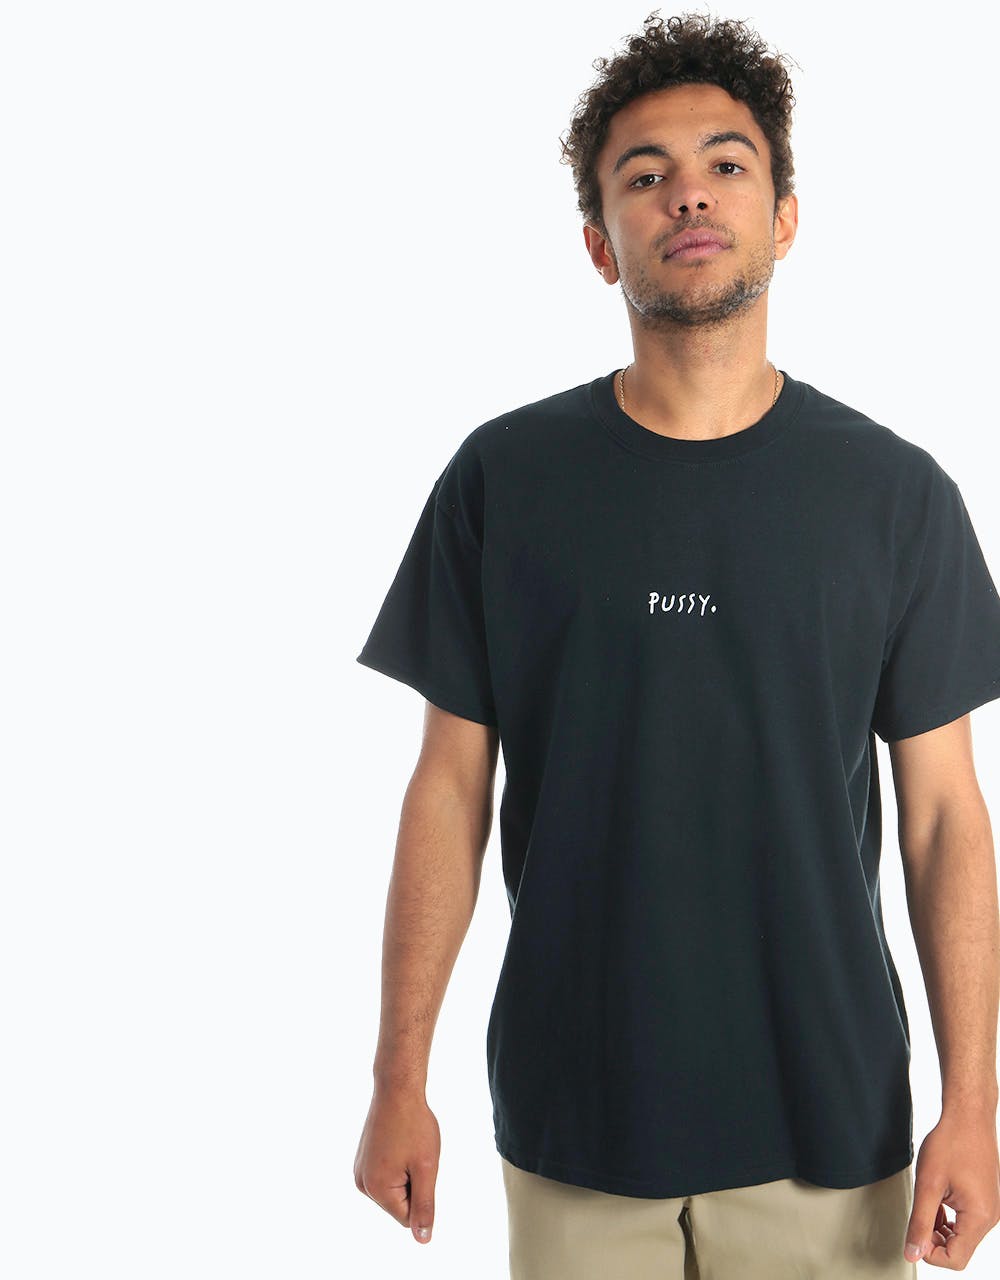 Route One Pussy T-Shirt - Black